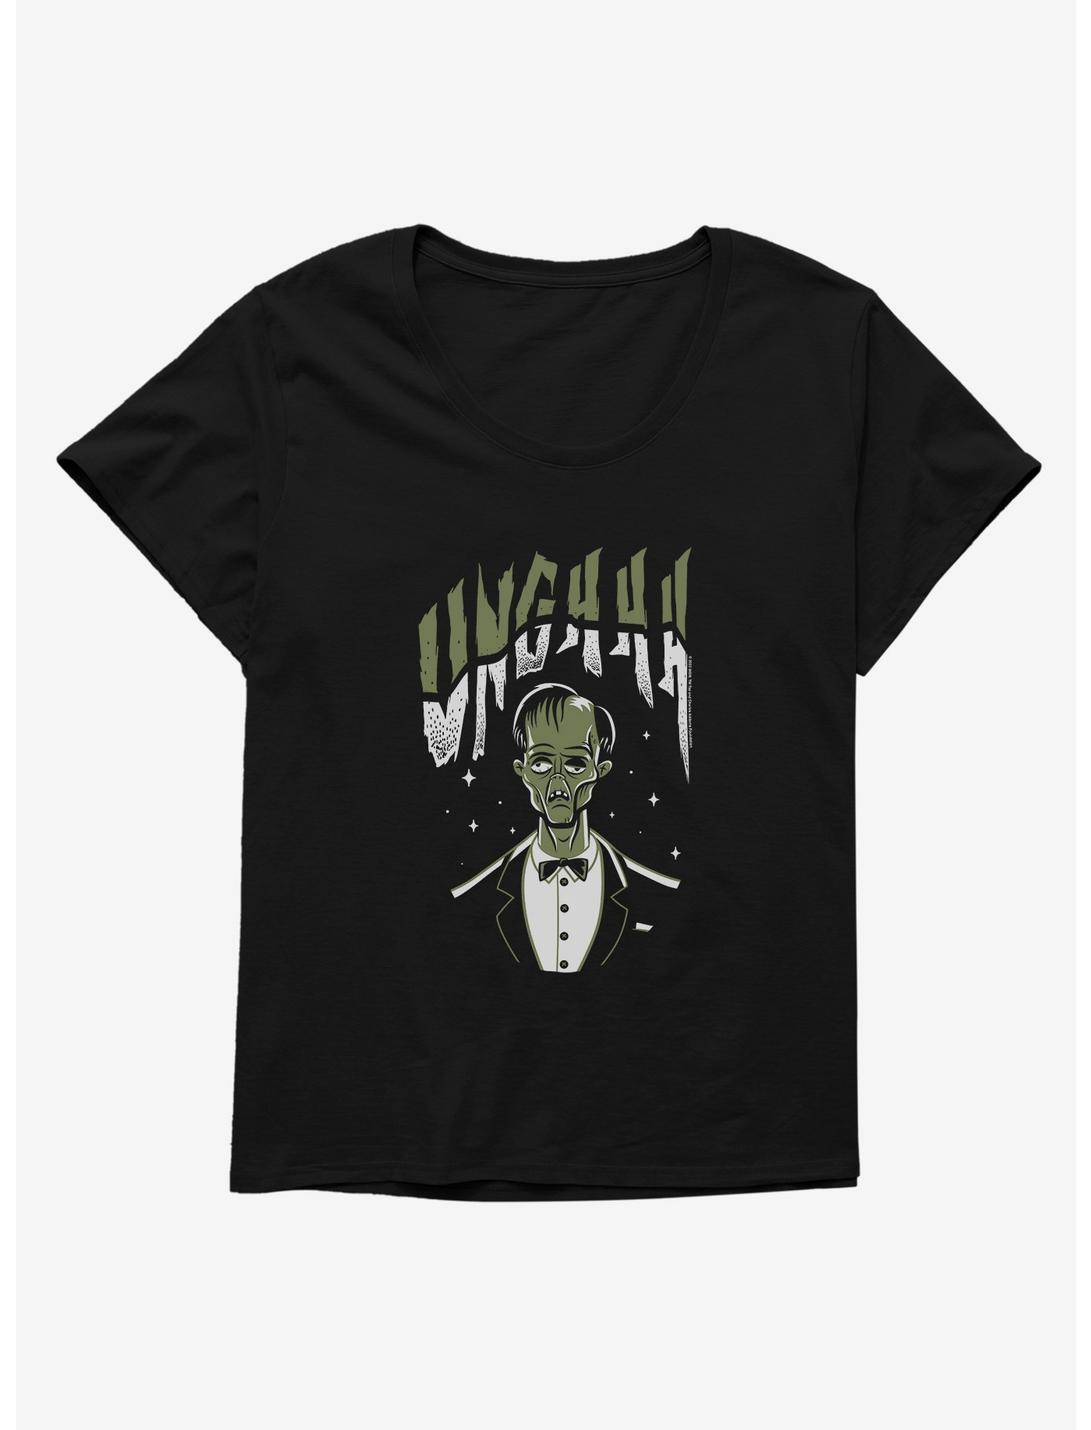 Addams Family Movie Caricature Lurch Unghhh Girls T-Shirt Plus Size, BLACK, hi-res